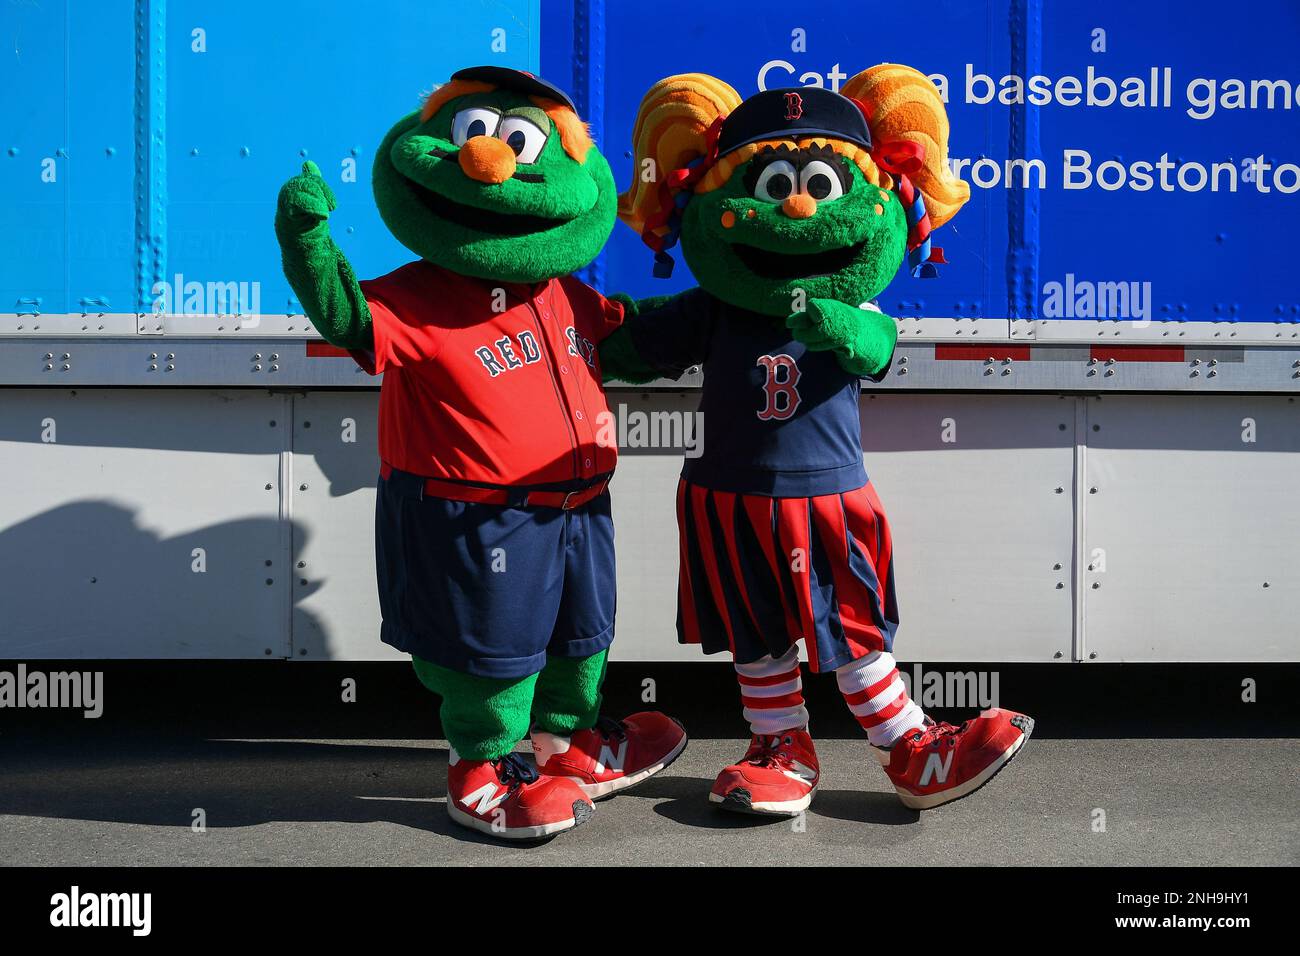 BOSTON, MA - FEBRUARY 03: Boston Red Sox mascots, Wally the Green Monster  (left) and Tessie the Green Monster (right), pose for a photo in front of  the spring training equipment truck